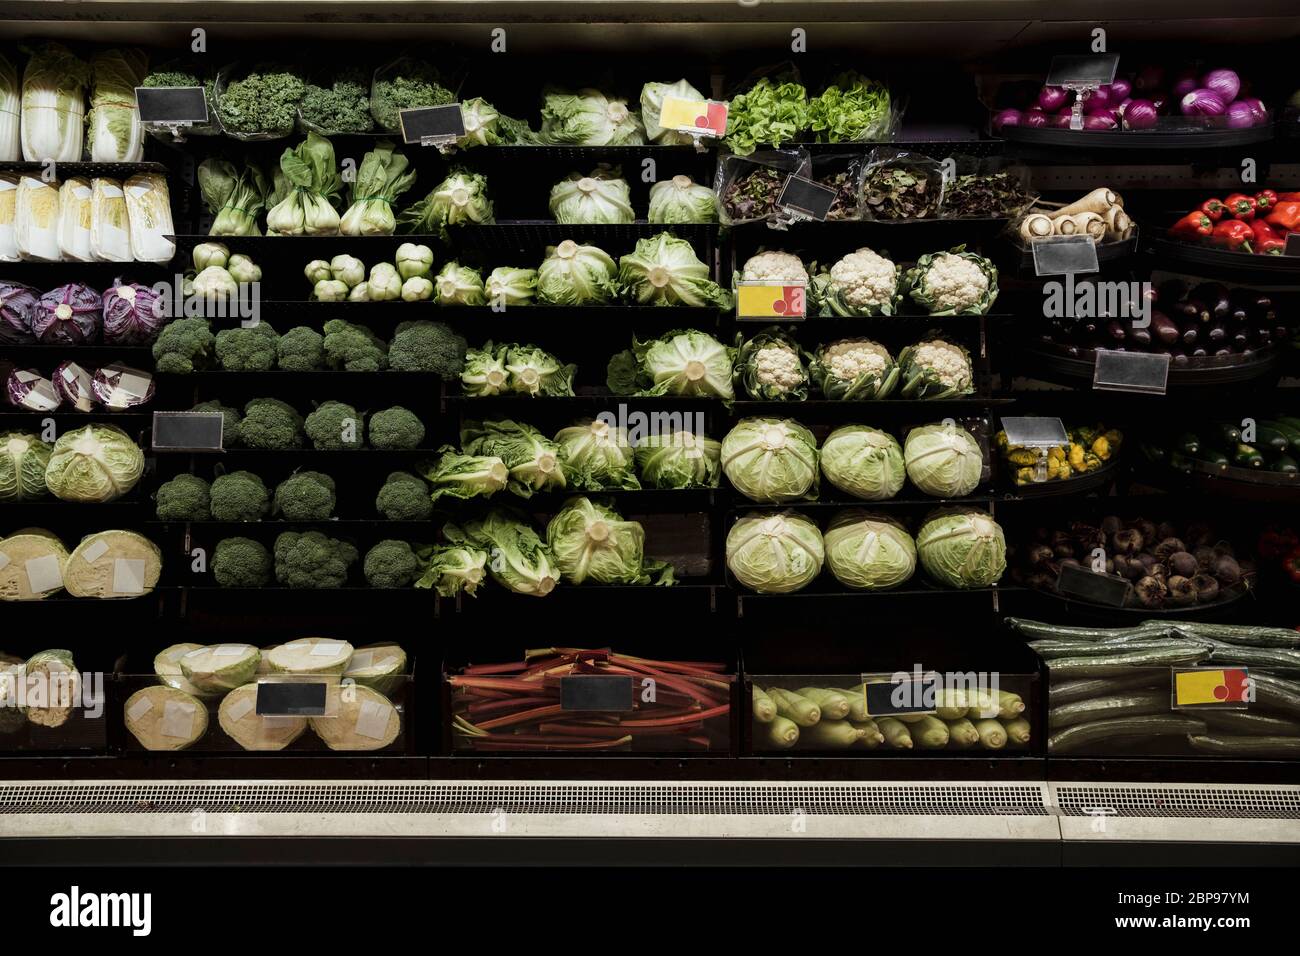 A wide-view shot of an abundance of fresh vegetables on display at a market stall. Stock Photo